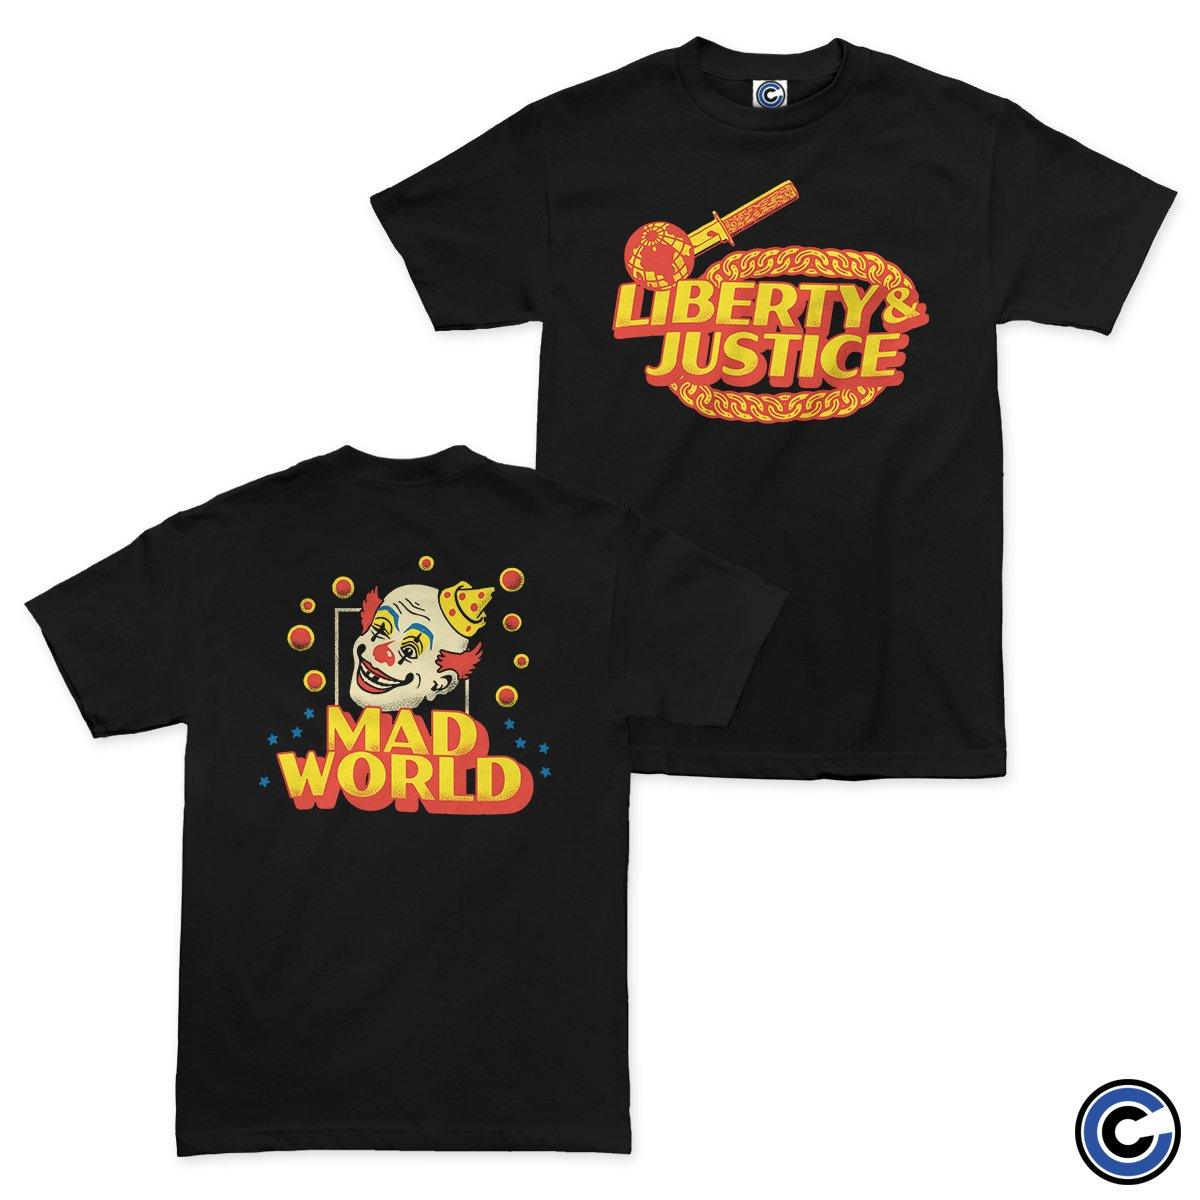 Buy – Liberty And Justice "Mad World" Shirt – Band & Music Merch – Cold Cuts Merch